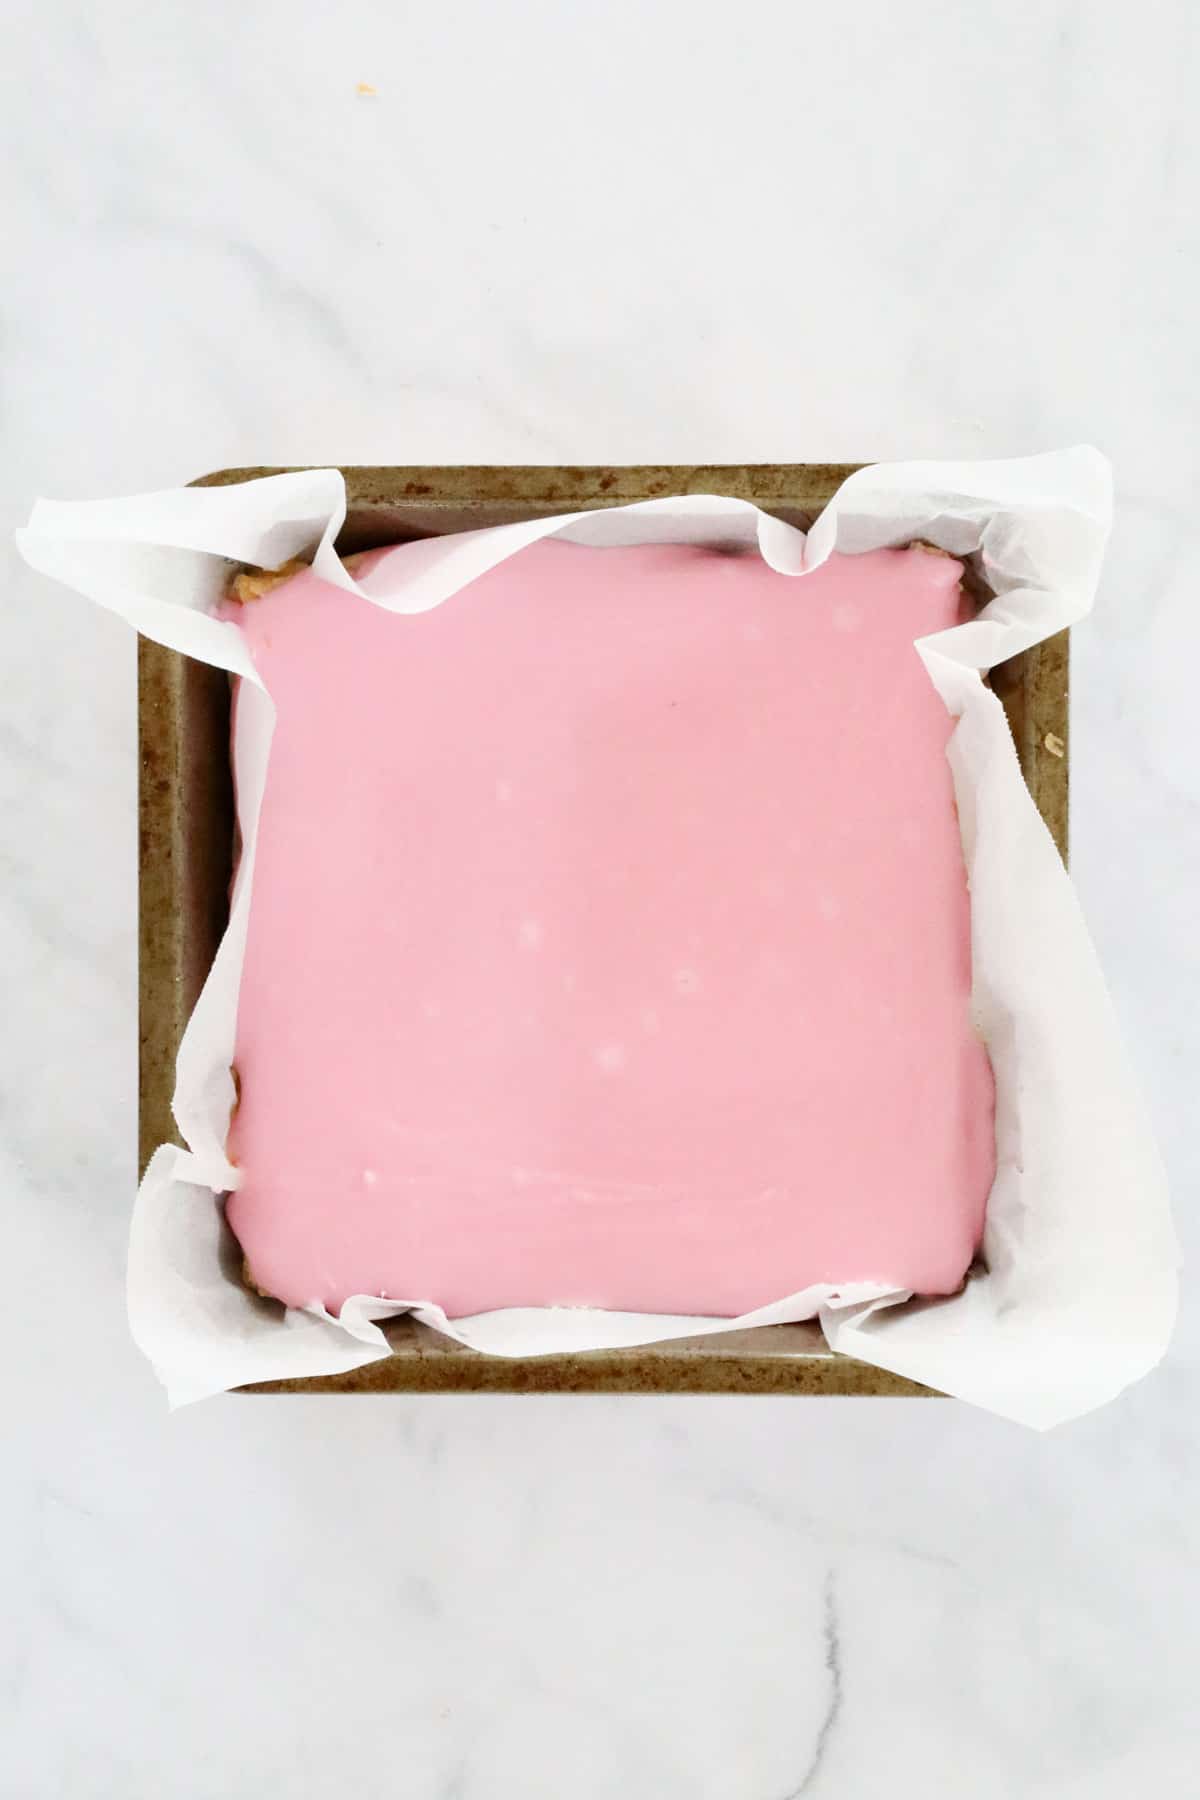 Pink glaze spread over the top layer of baked puff pastry in a paper lined tin.